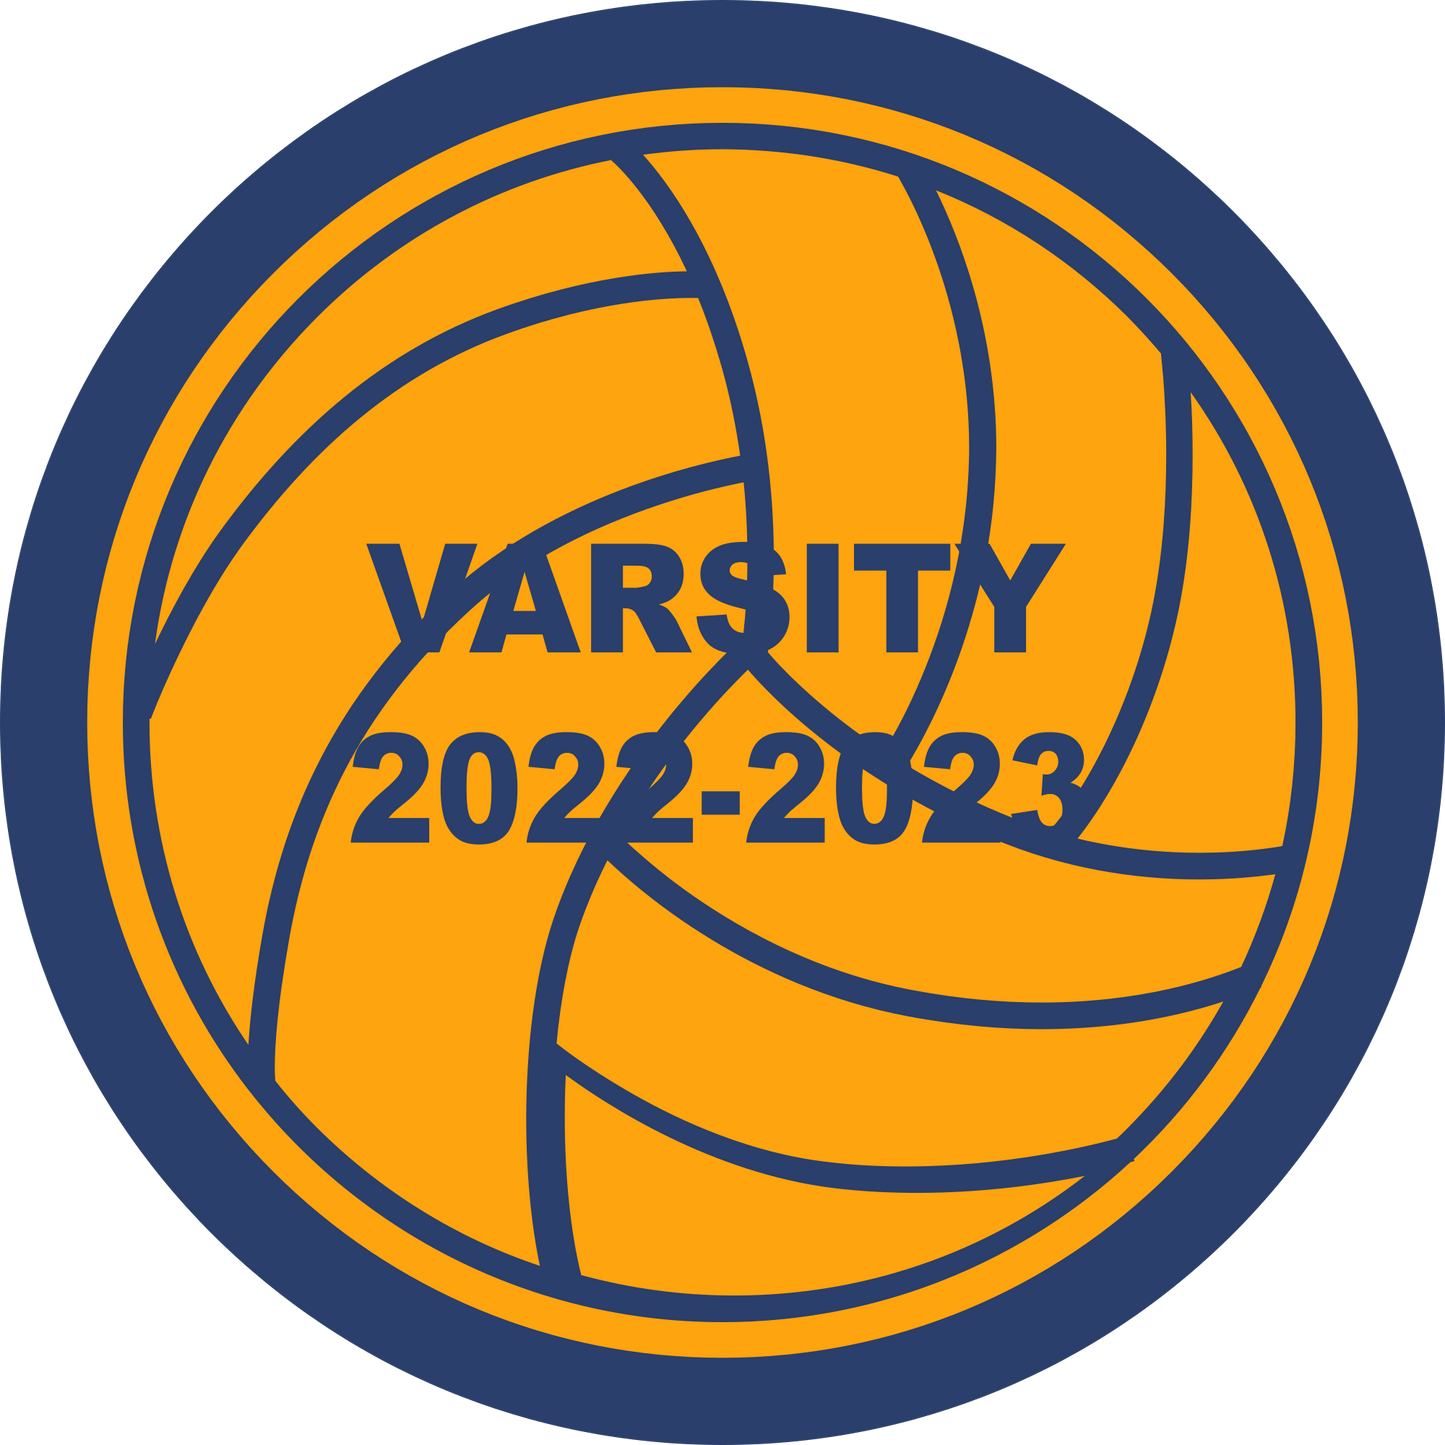 New Volleyball Sleeve Patch